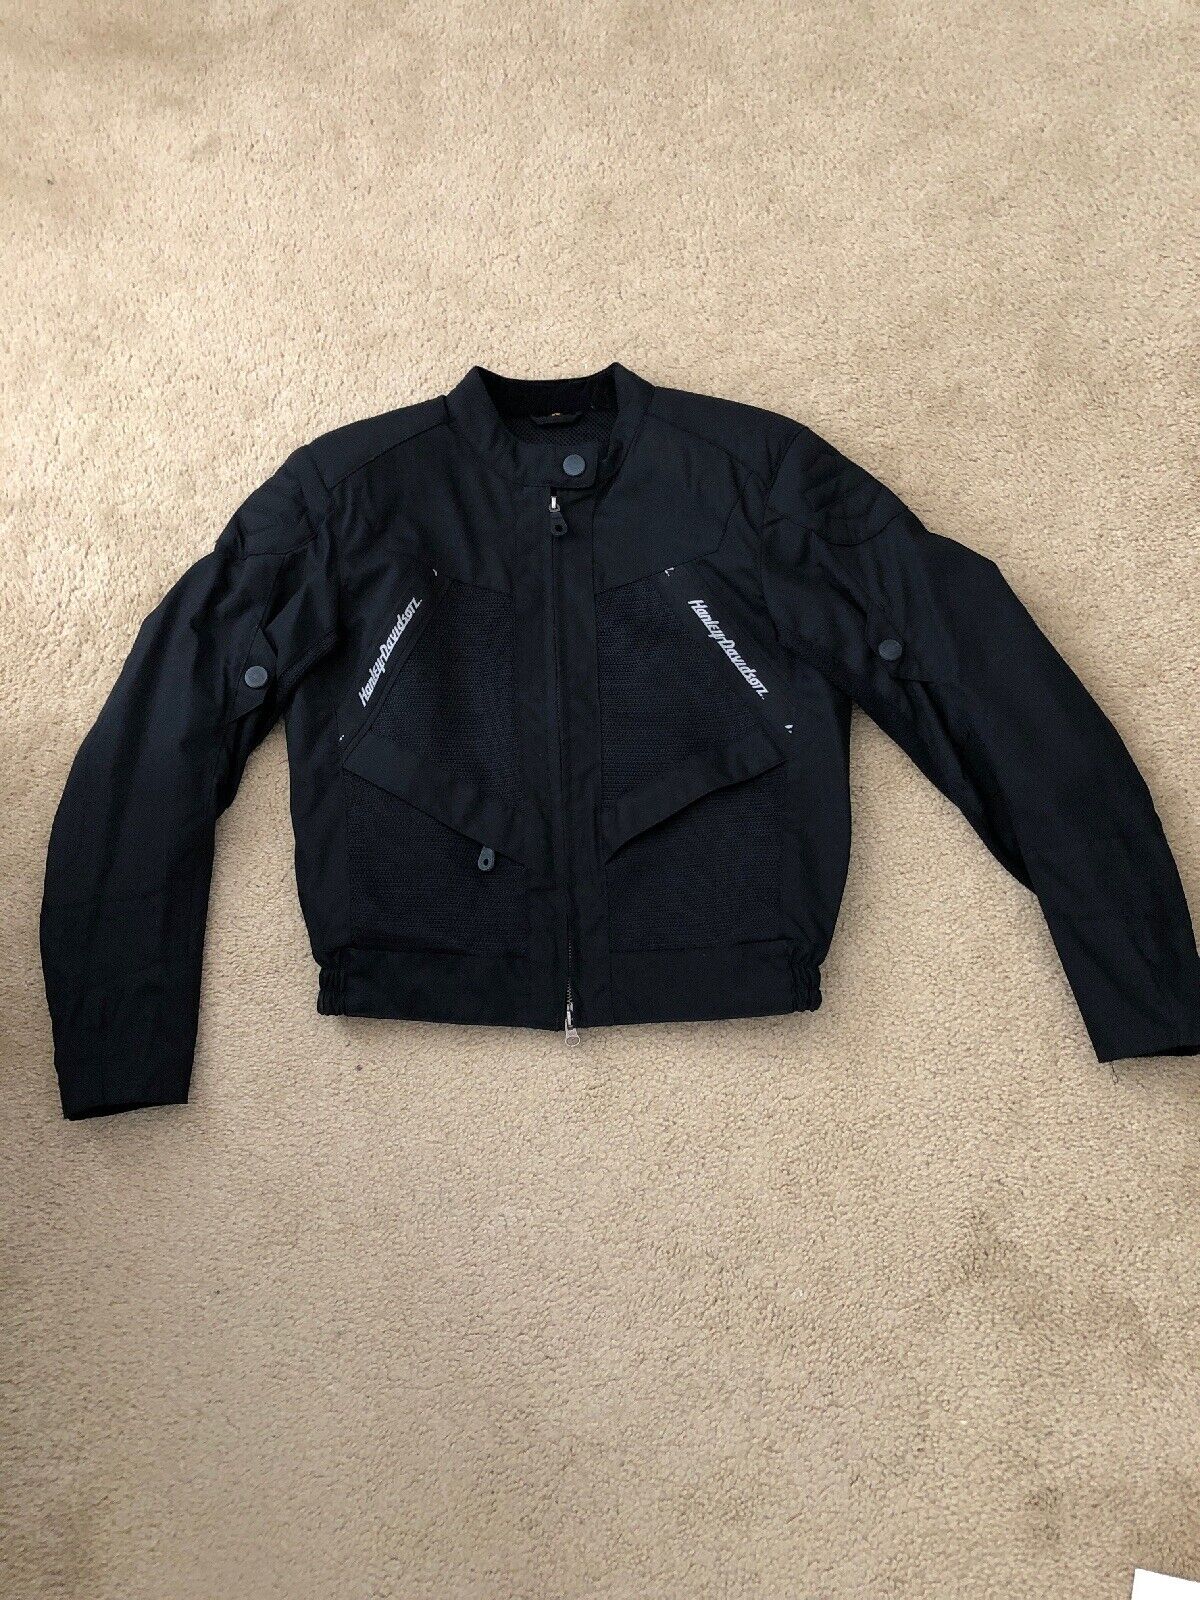 Pre-owned Harley Davidson Motorcycle Riding Jacket Size XS